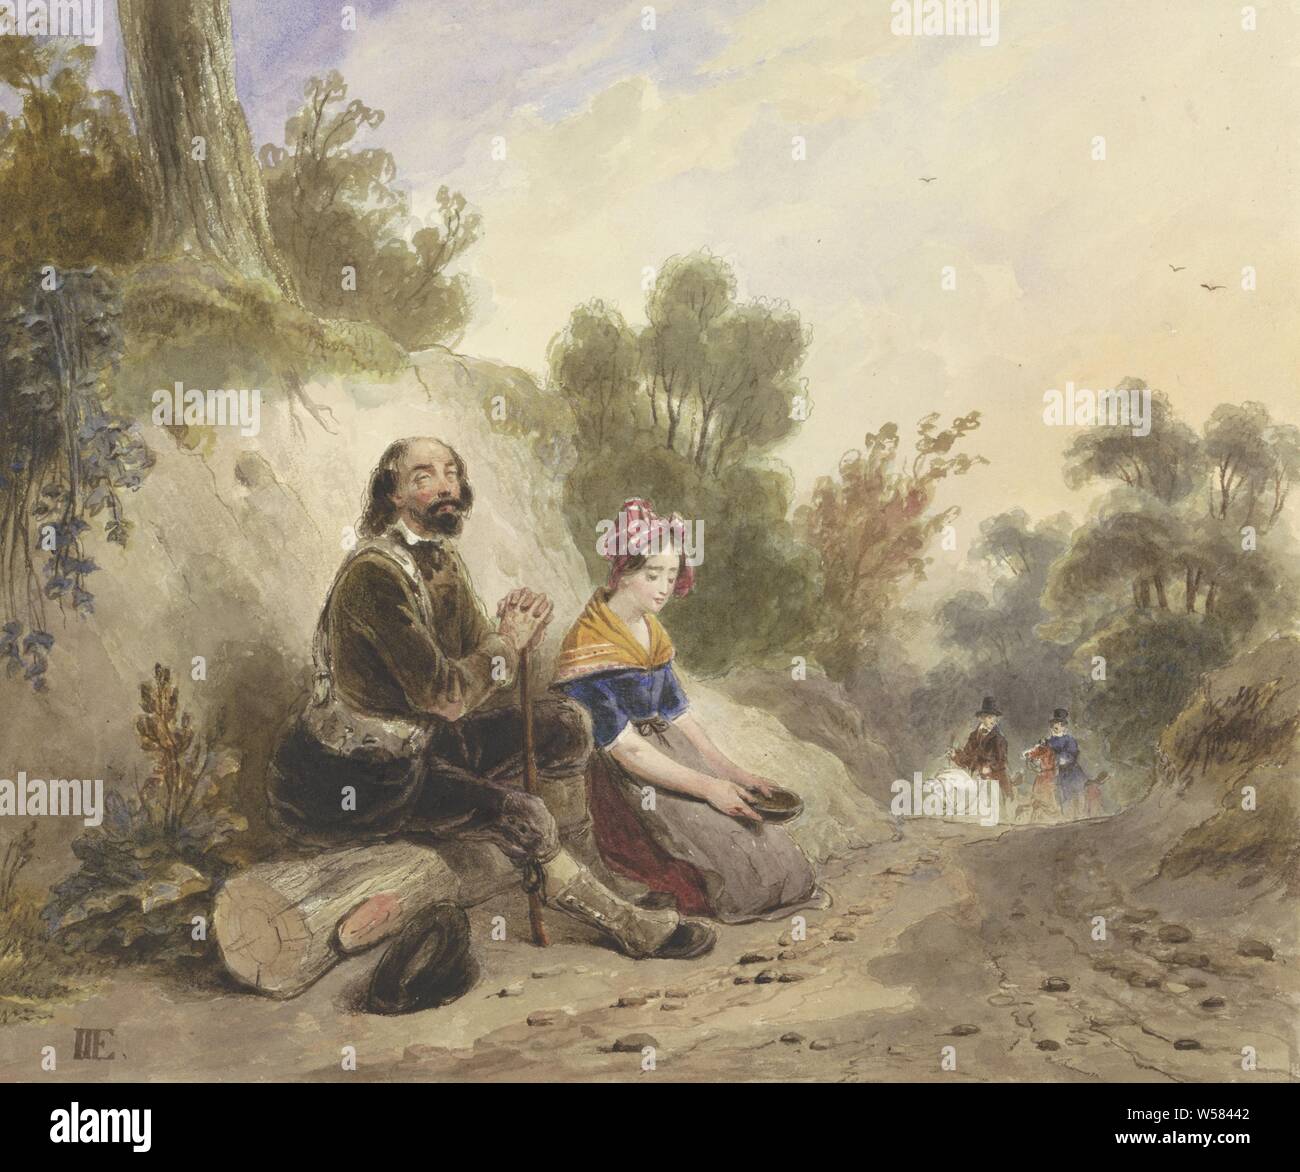 Blind man and girl, begging on a country road side, blind, blindness, beggar, Jacob Joseph Eeckhout, 1803 - 1861, paper, watercolor (paint), brush, h 222 mm × w 265 mm Stock Photo